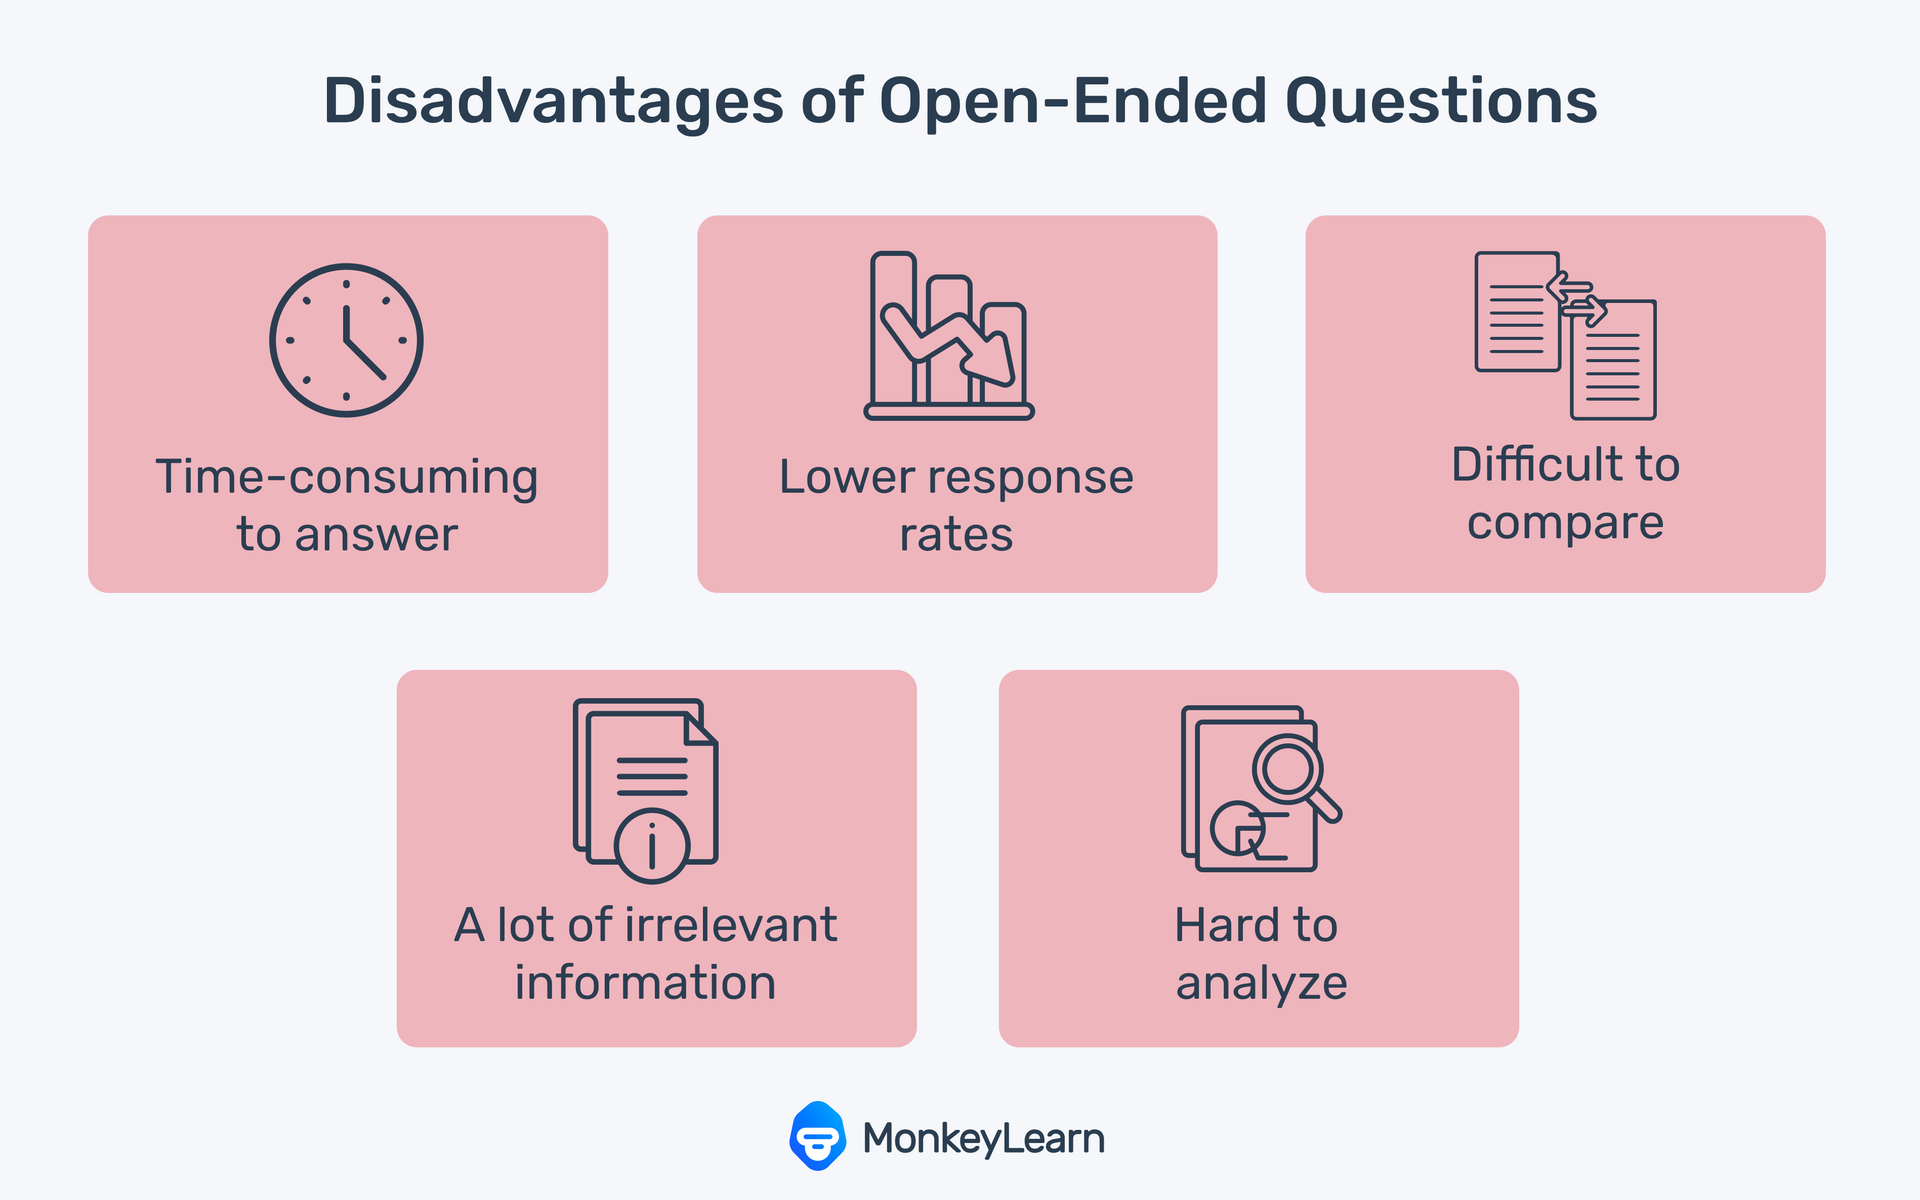 List of disadvantages of open ended questions.